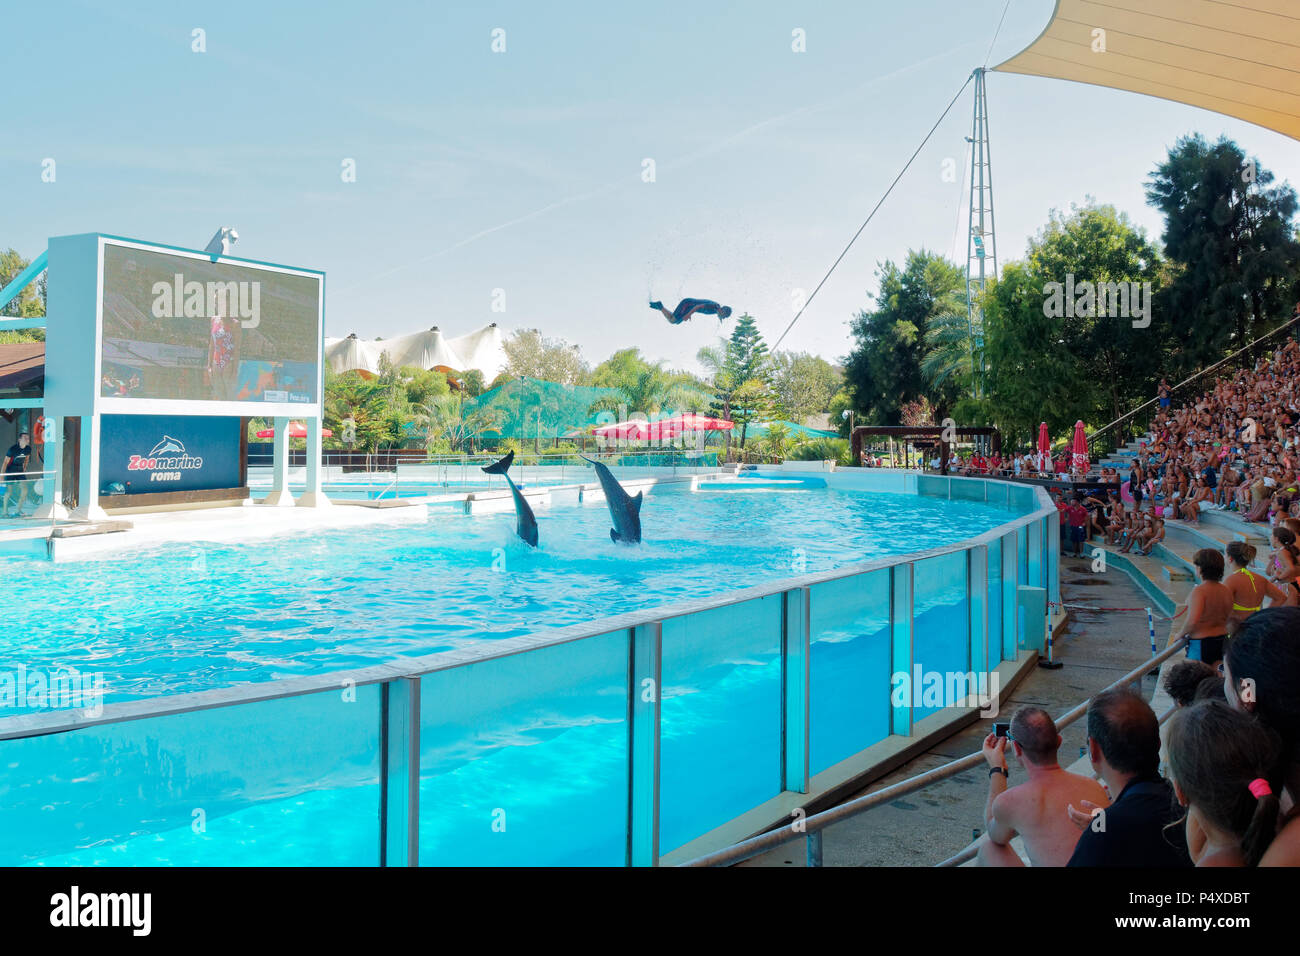 Rome, Italy - August 2016: Dolphins show at water amusement park zoomarine Stock Photo